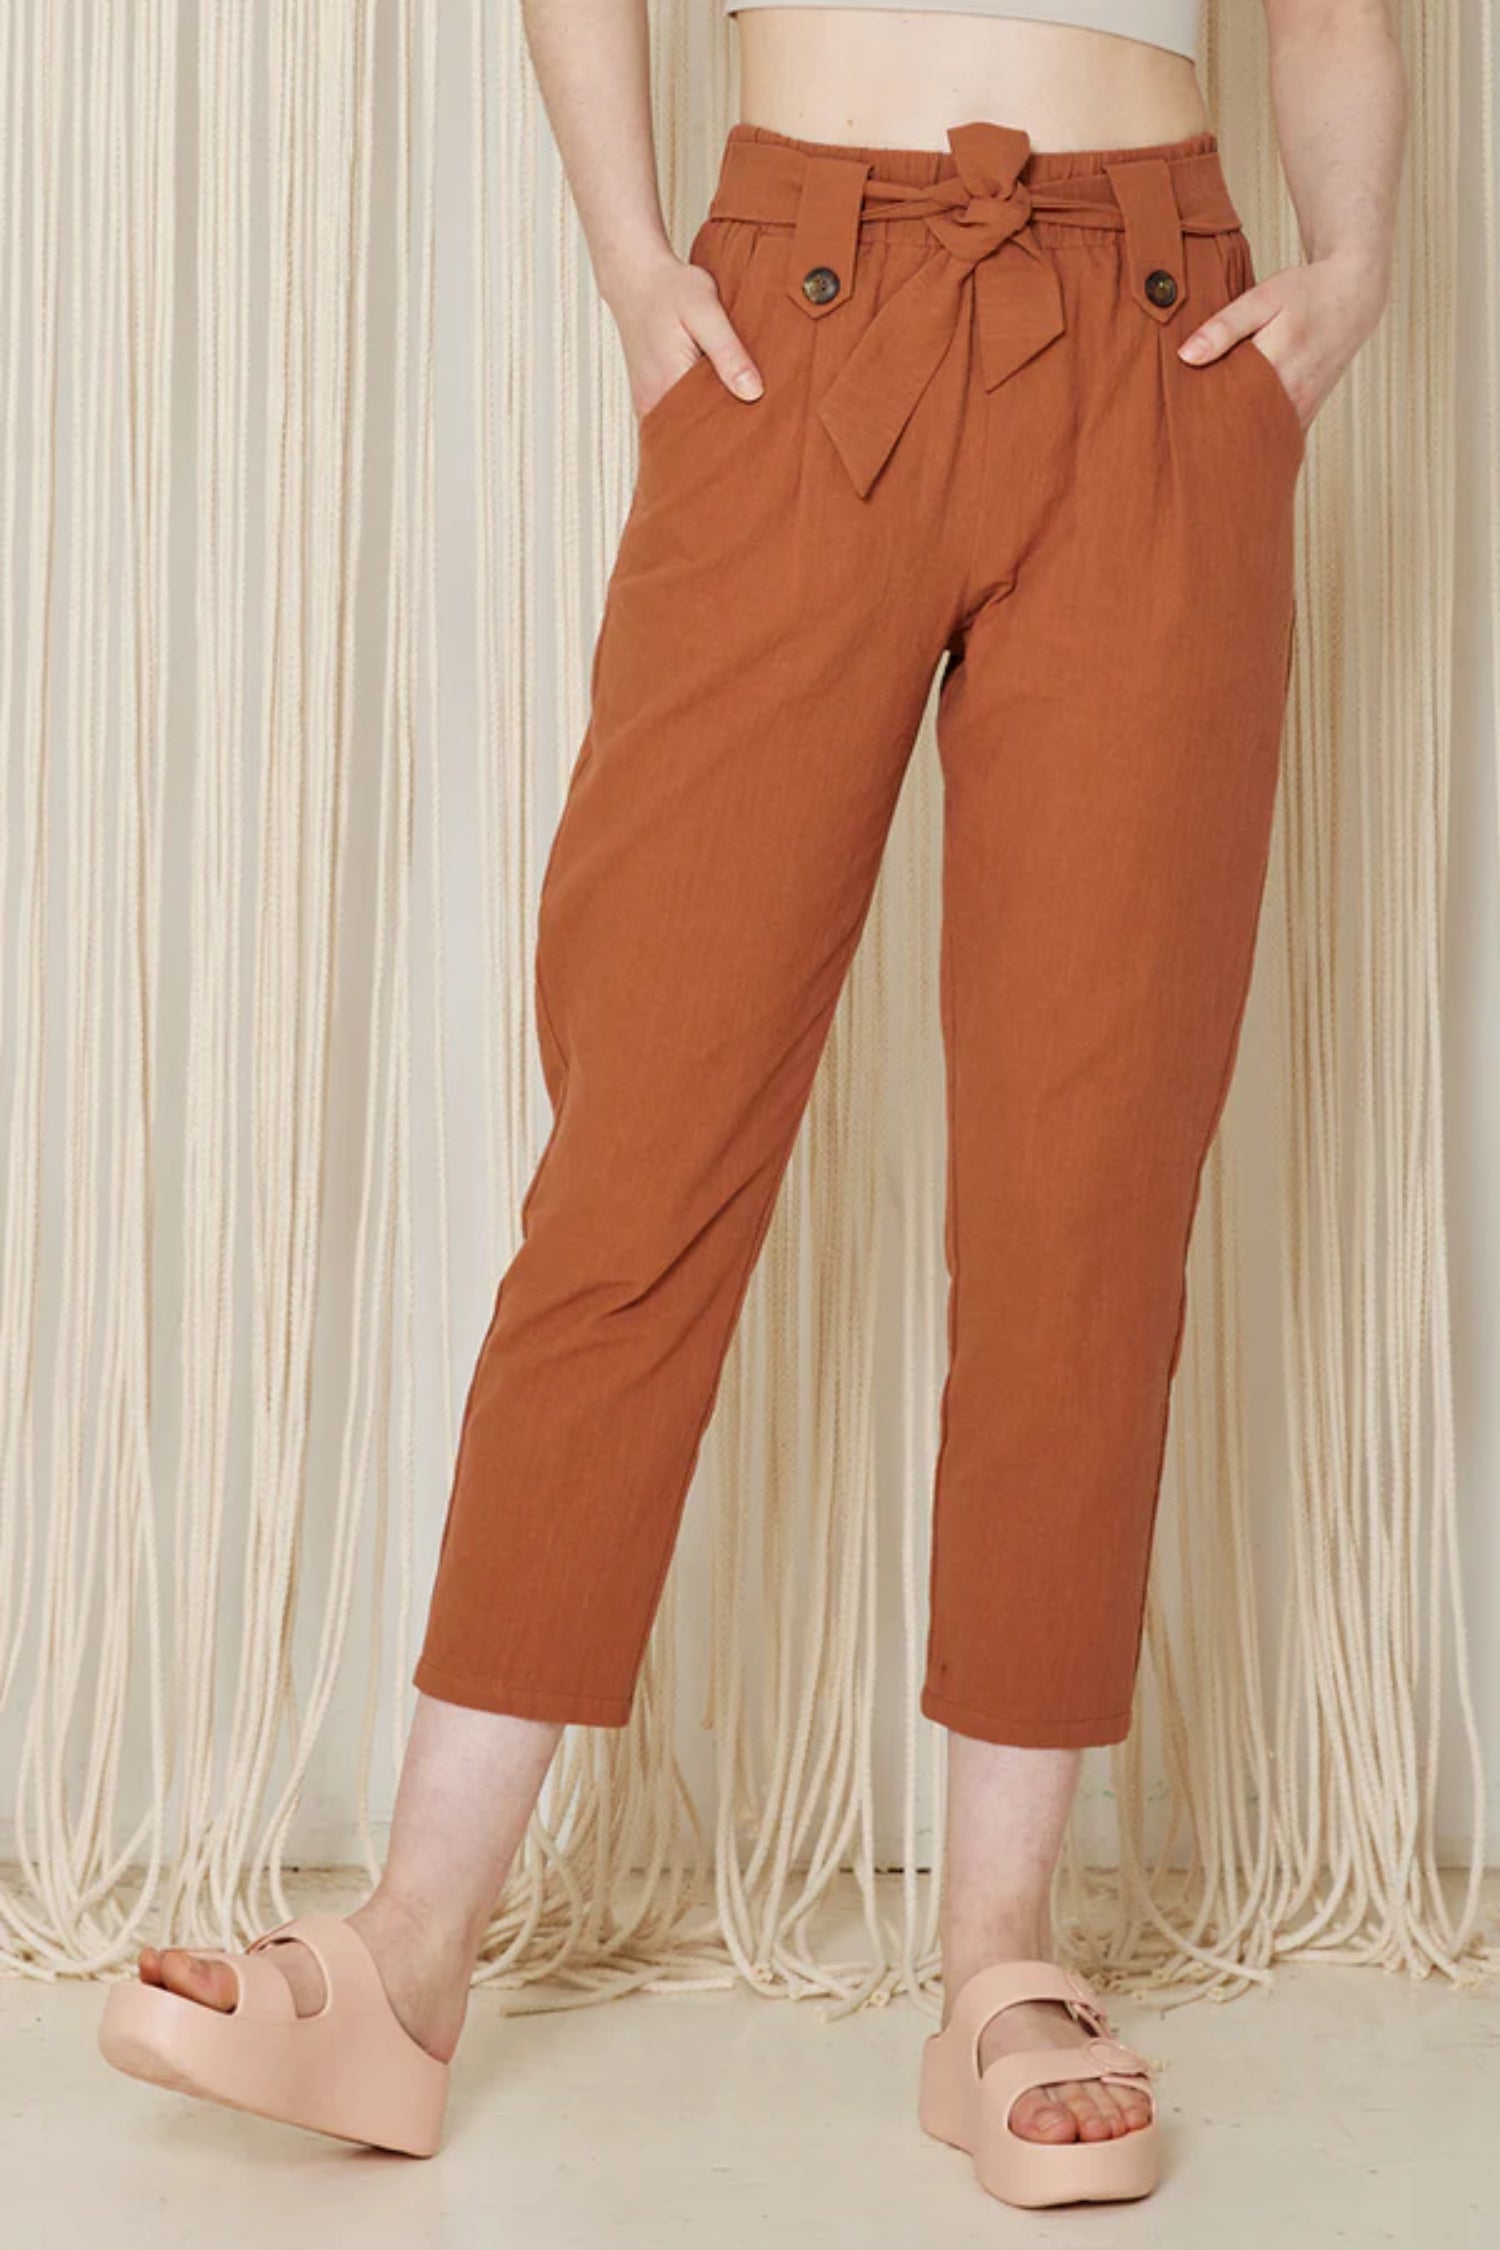 Hosta Pants by Cokluch, Sienna, elastic waist, sewn-in belt  held in place with loops and buttons, tapered ankle-length legs, eco-fabric, cotton, OEKO-TEX certified, sizes XS to XL, made in Montreal 